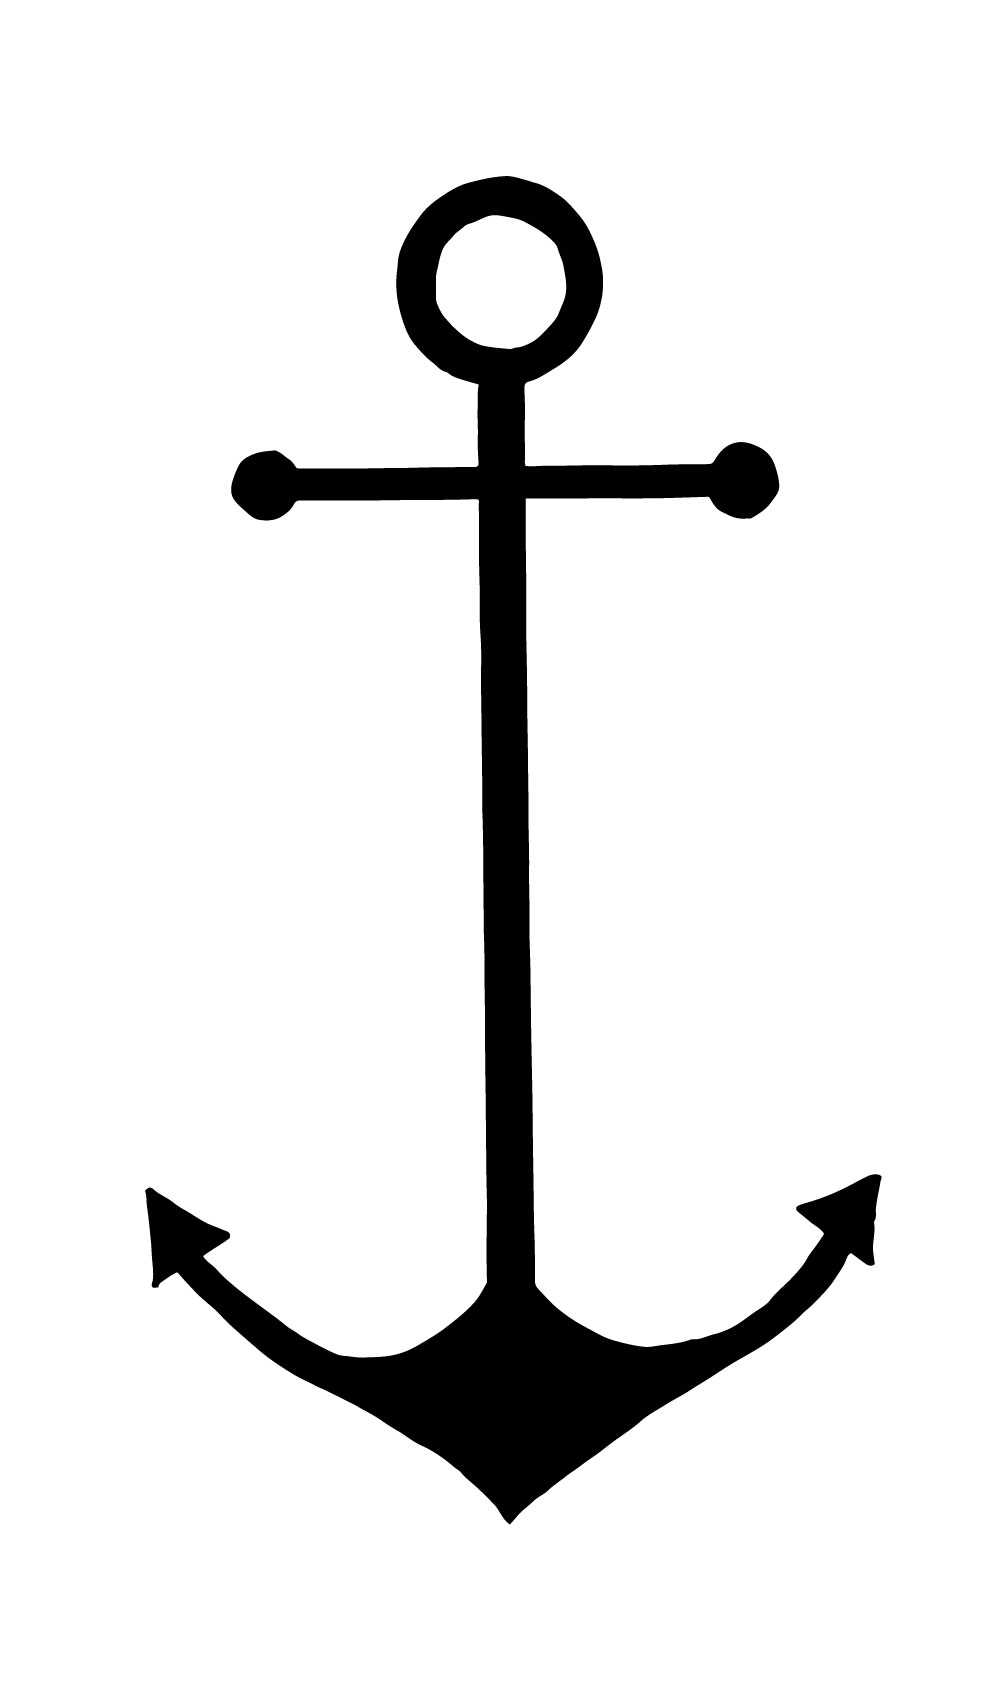 Anchor clipart black and white china cps